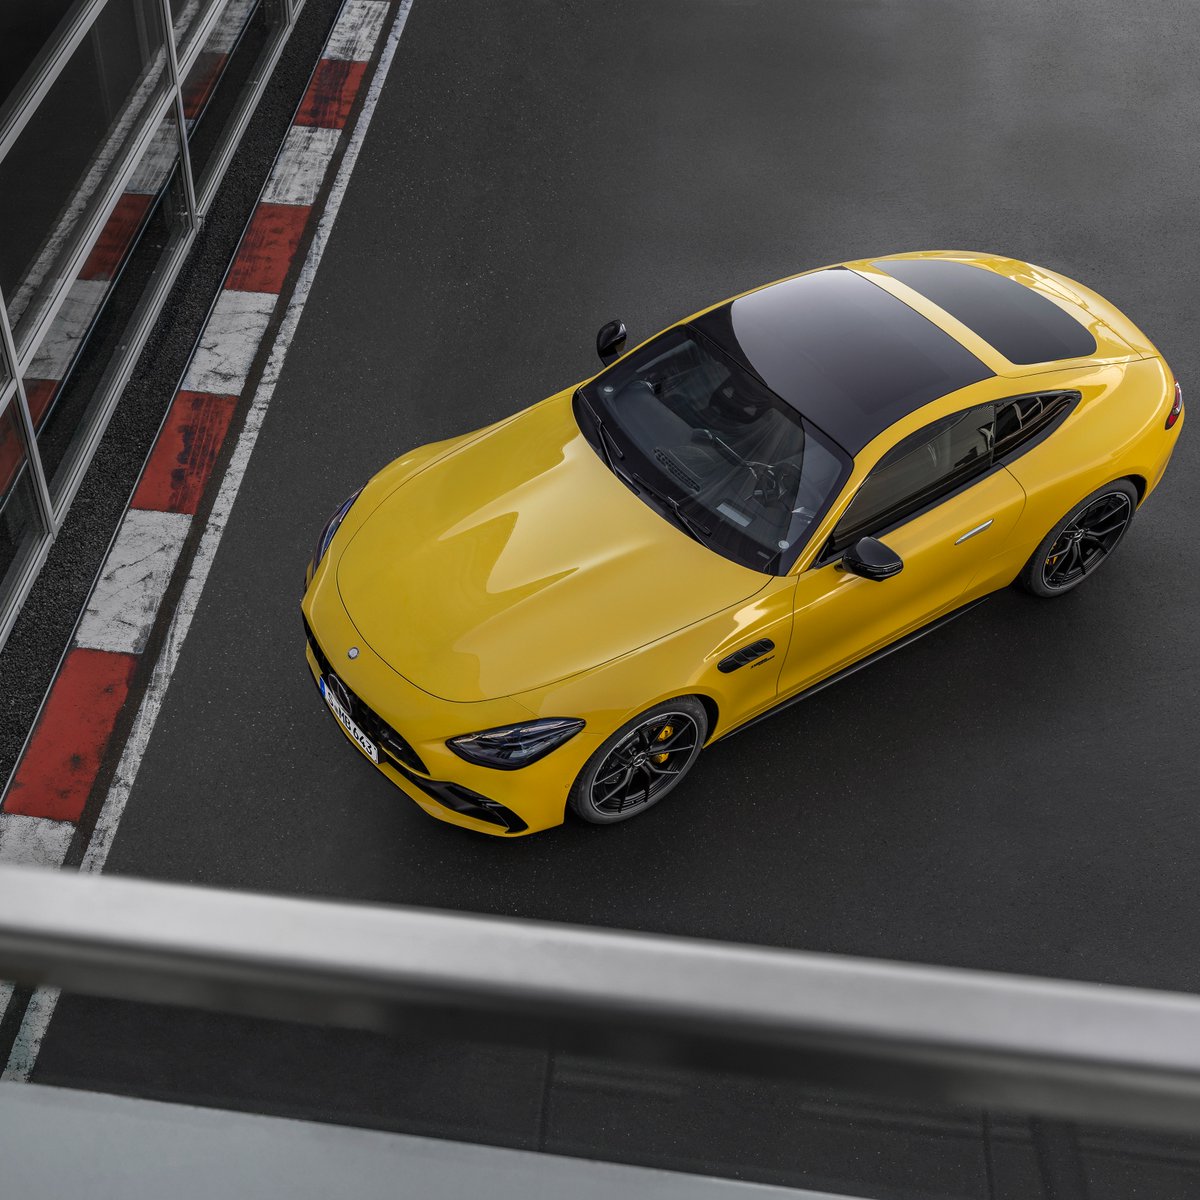 Do you know what #MercedesAMG uses to improve the aerodynamics of the #GT 43 Coupé? The active air control system AIRPANEL. More: mb.mb4.me/active-aerodyn… [Mercedes-AMG GT 43 | Energieverbrauch kombiniert: 10,3 l/100 km, CO₂-Emissionen kombiniert: 235 g/km, CO₂-Klasse: G]